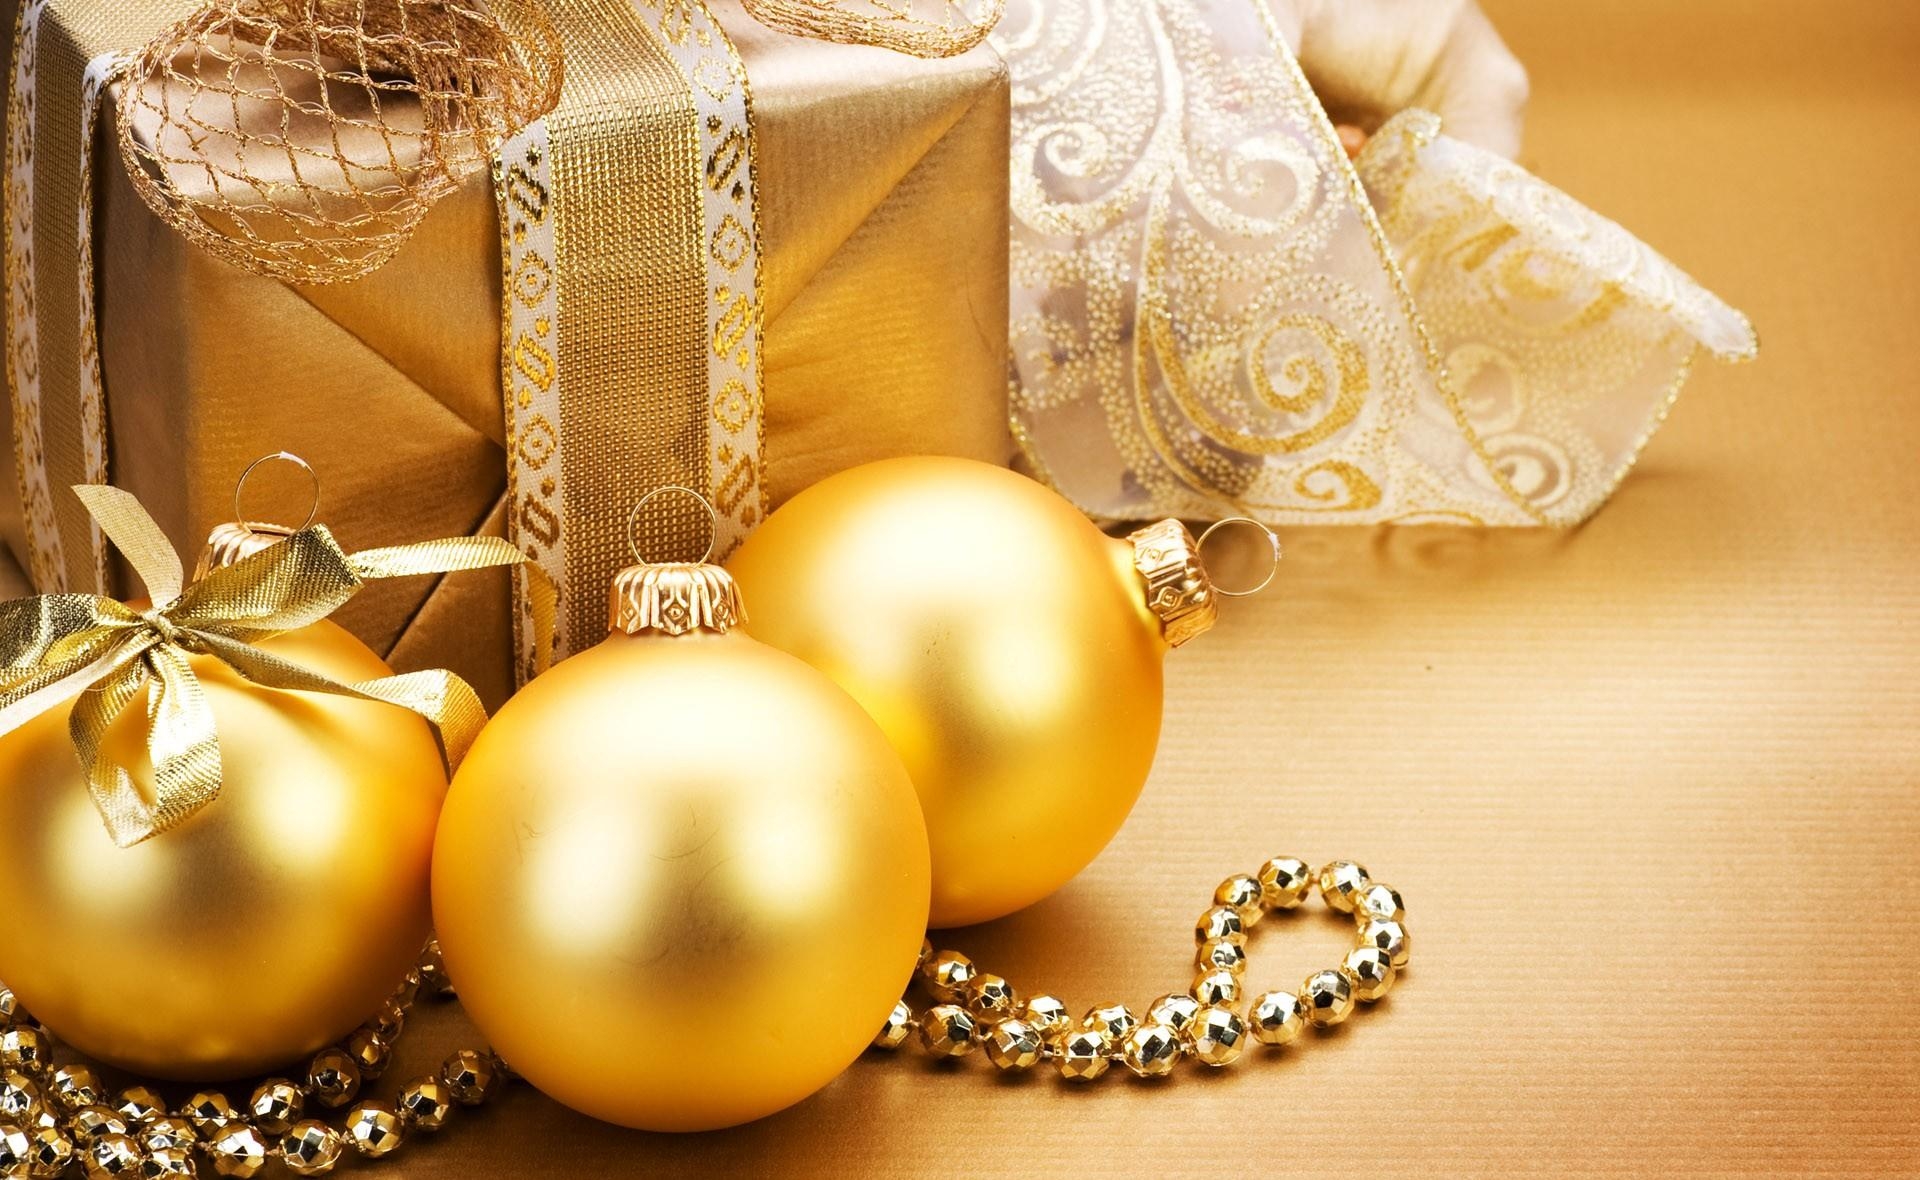 Christmas Decorations Golden Balls Gifts Ornaments Ribbon Gold Wishes Pic